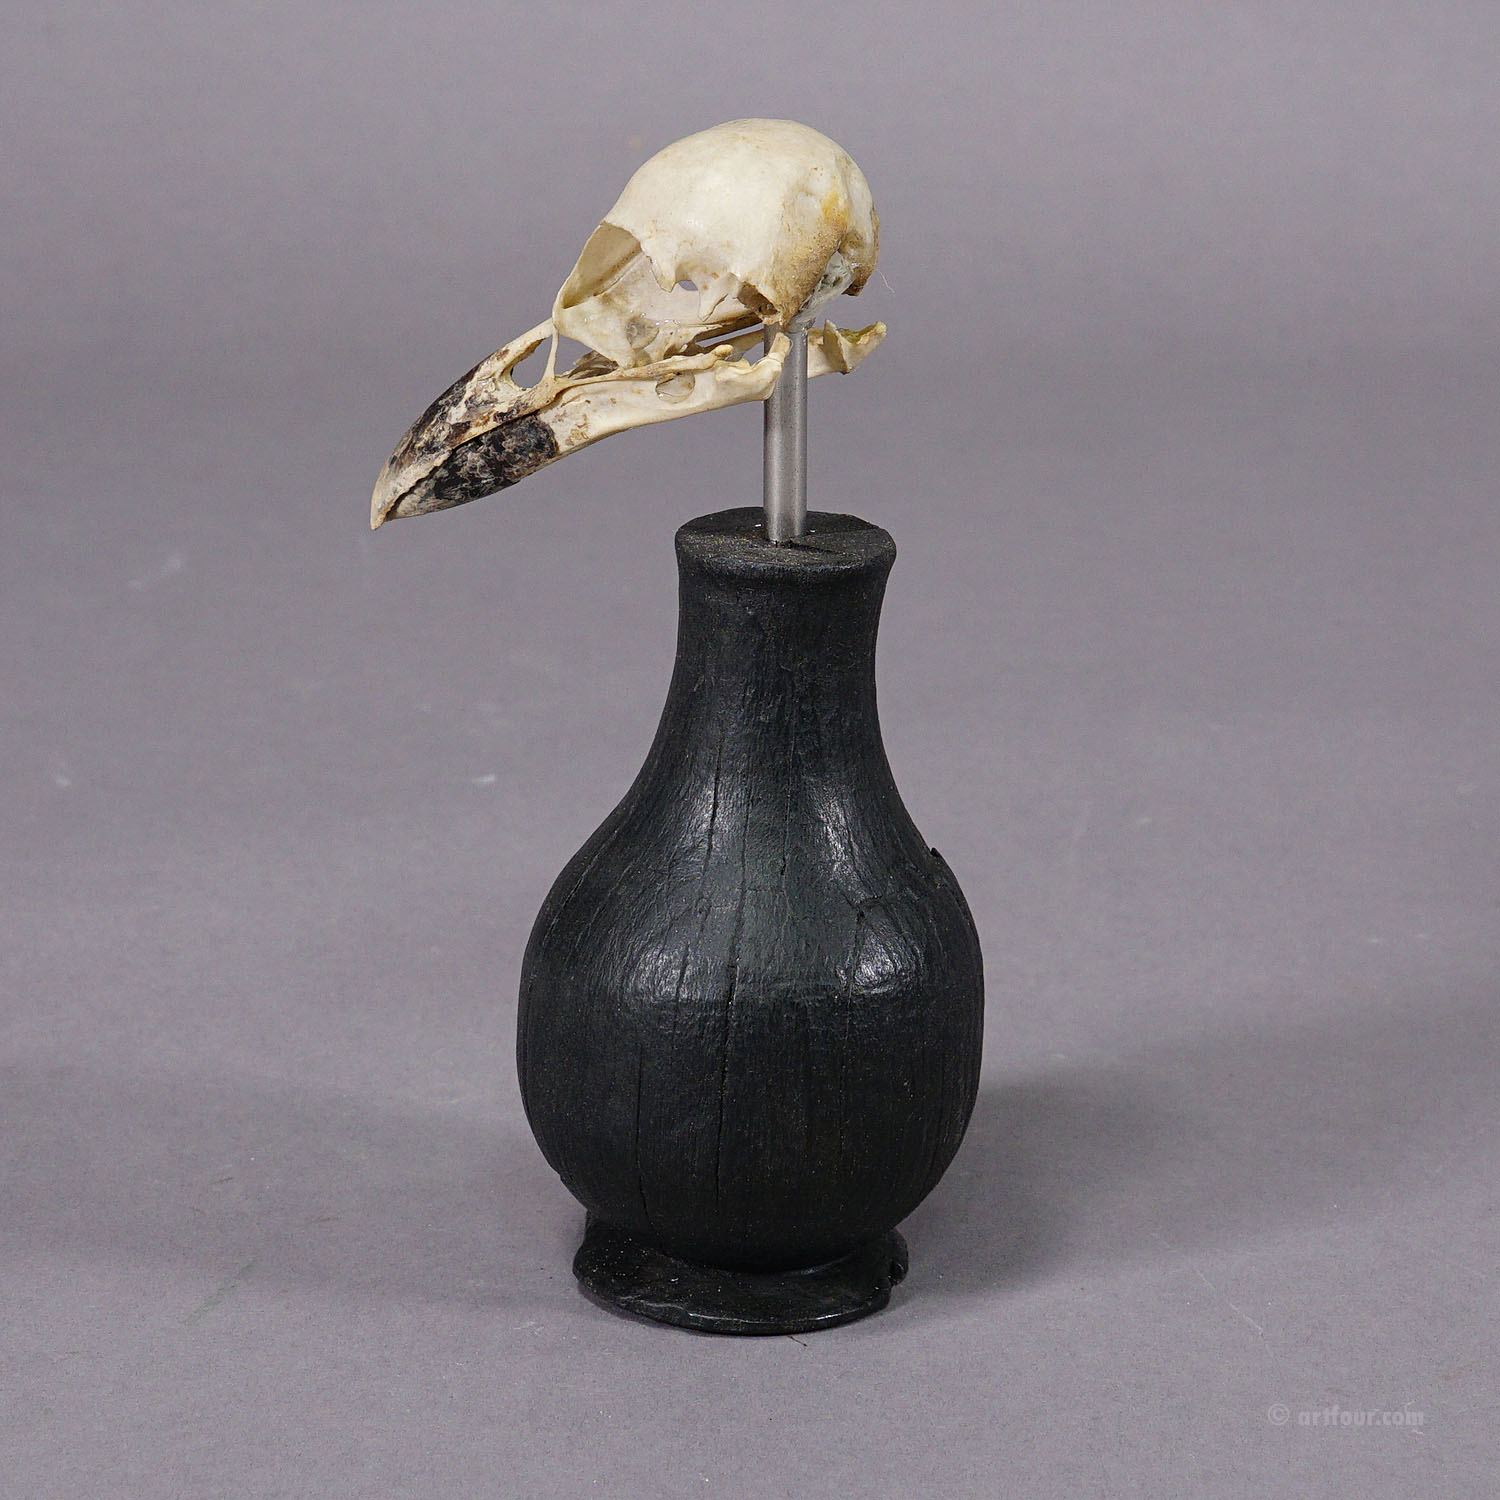 Antique Real Skull of a Crow or Magpie, Germany ca. 1900s